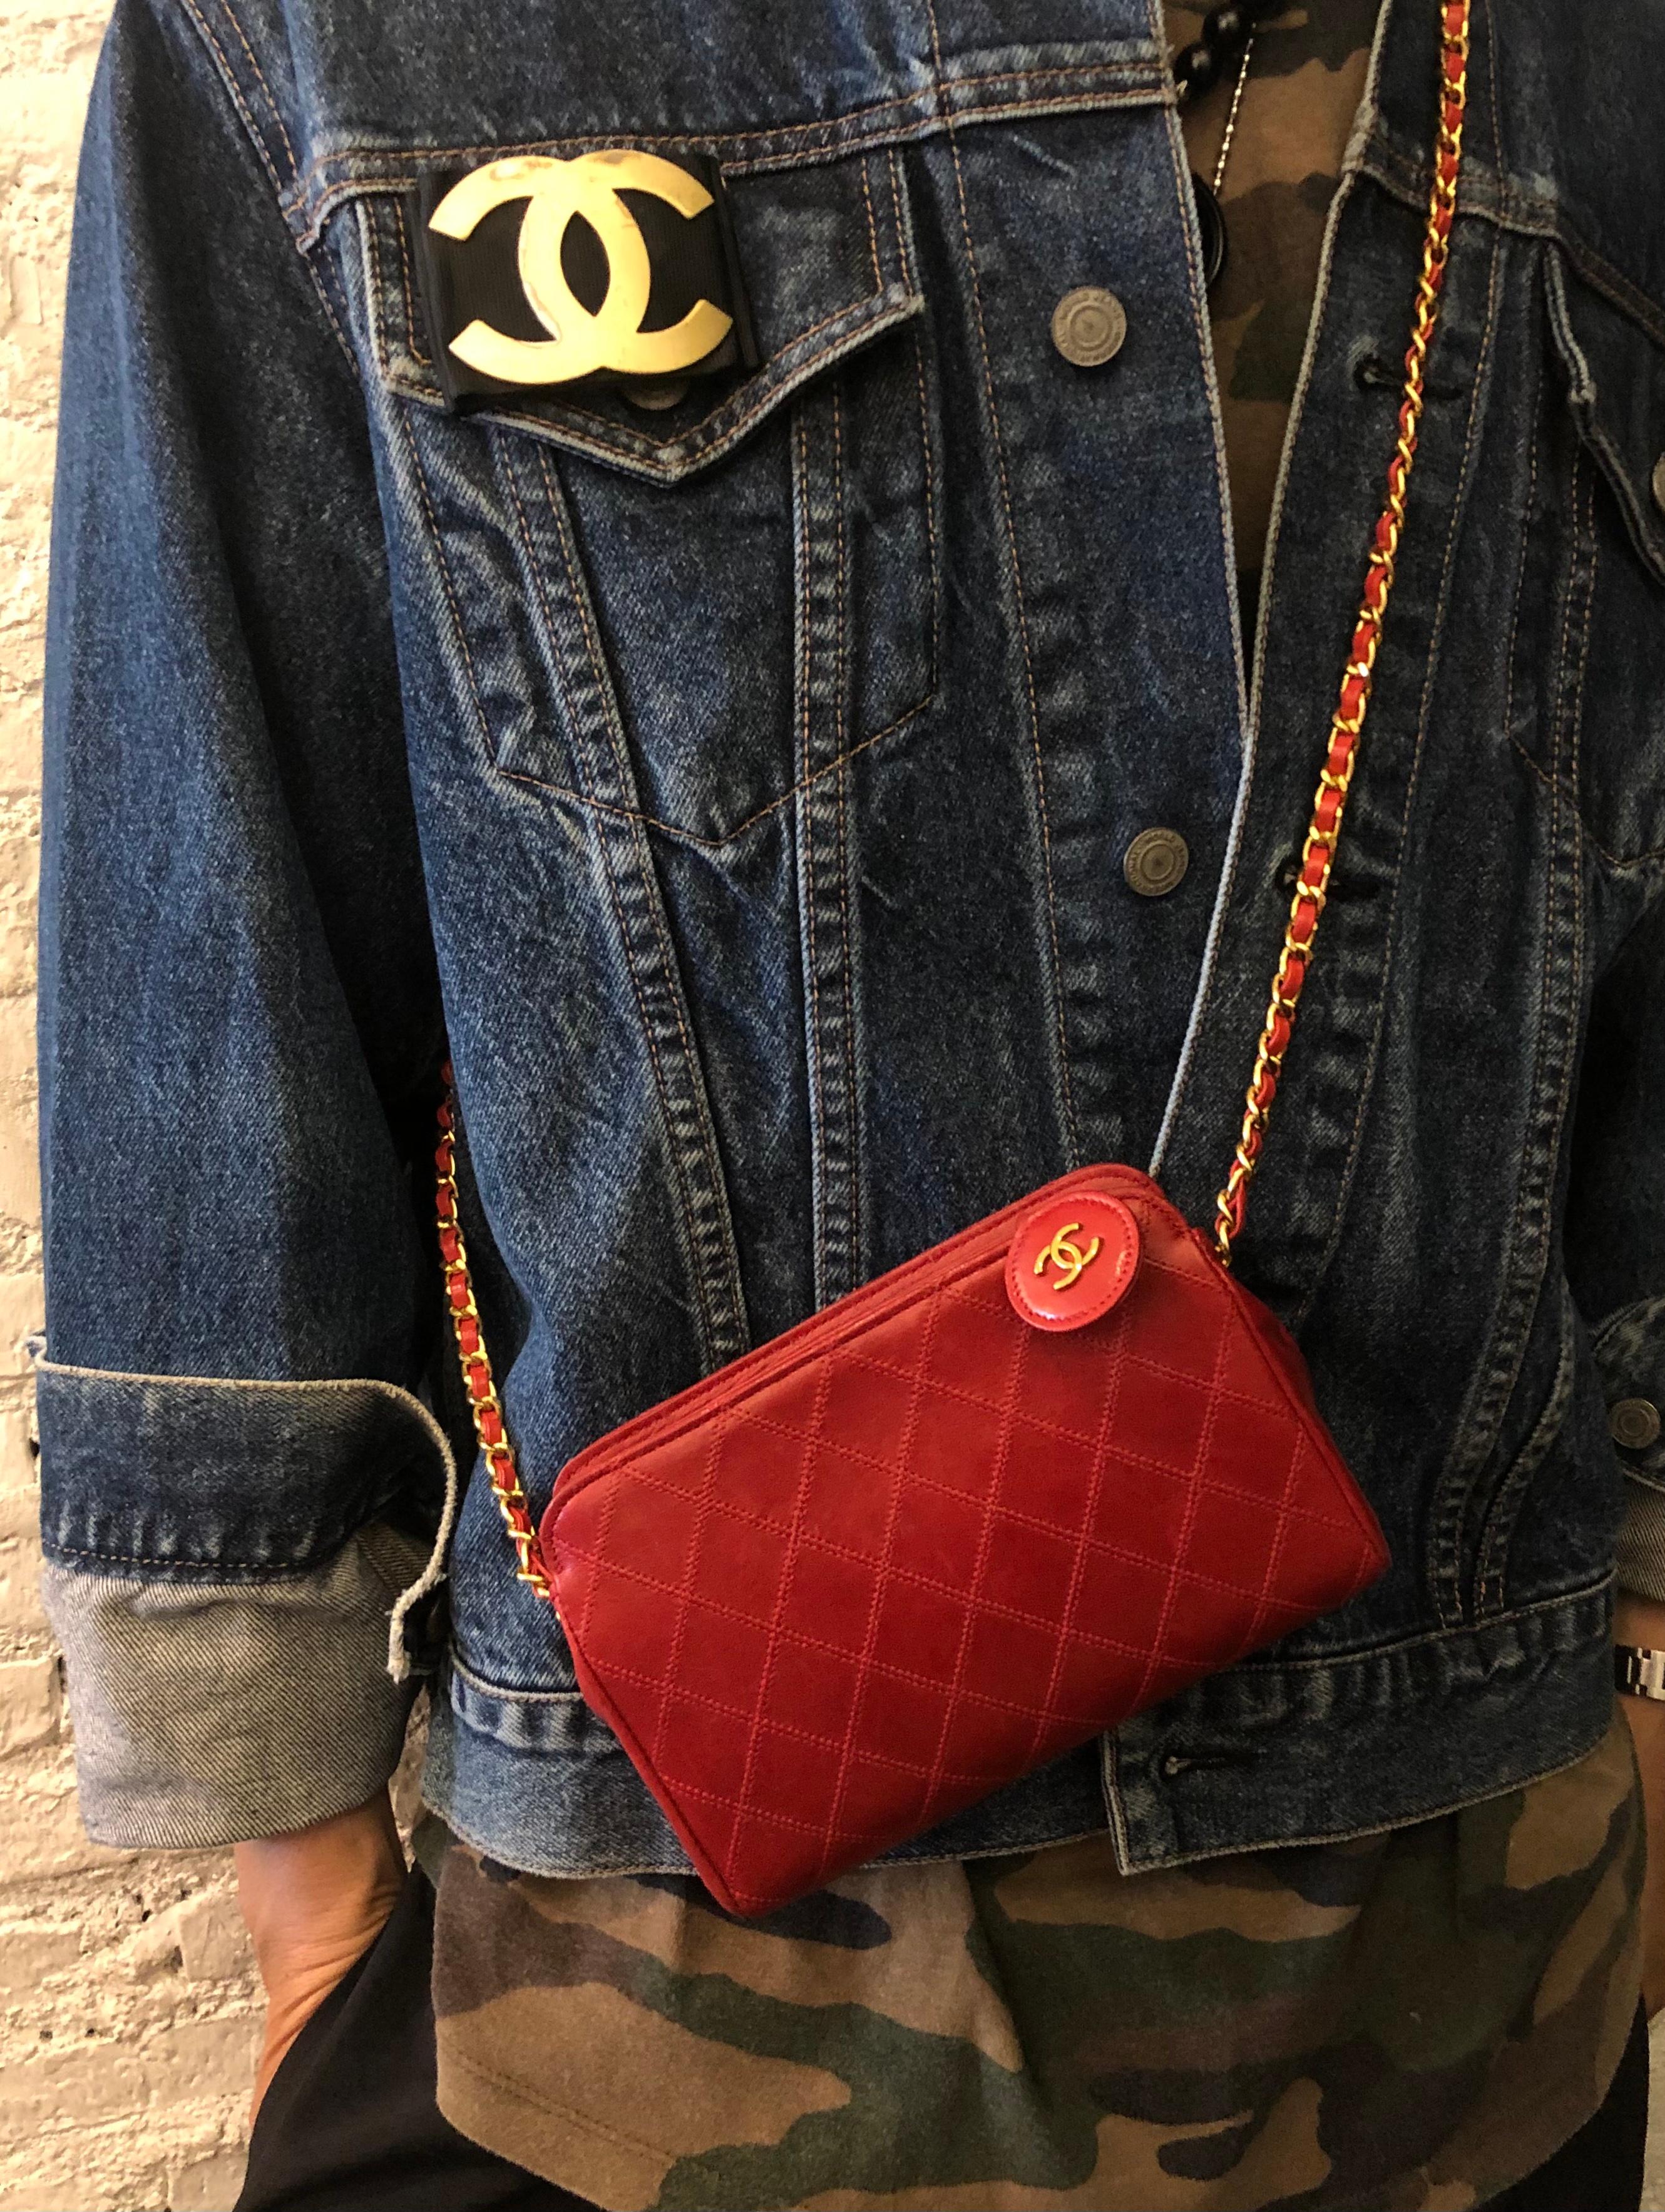 Women's or Men's Vintage CHANEL Diamond Quilted Lambskin Leather Pouch Bag Clutch Red (Altered)